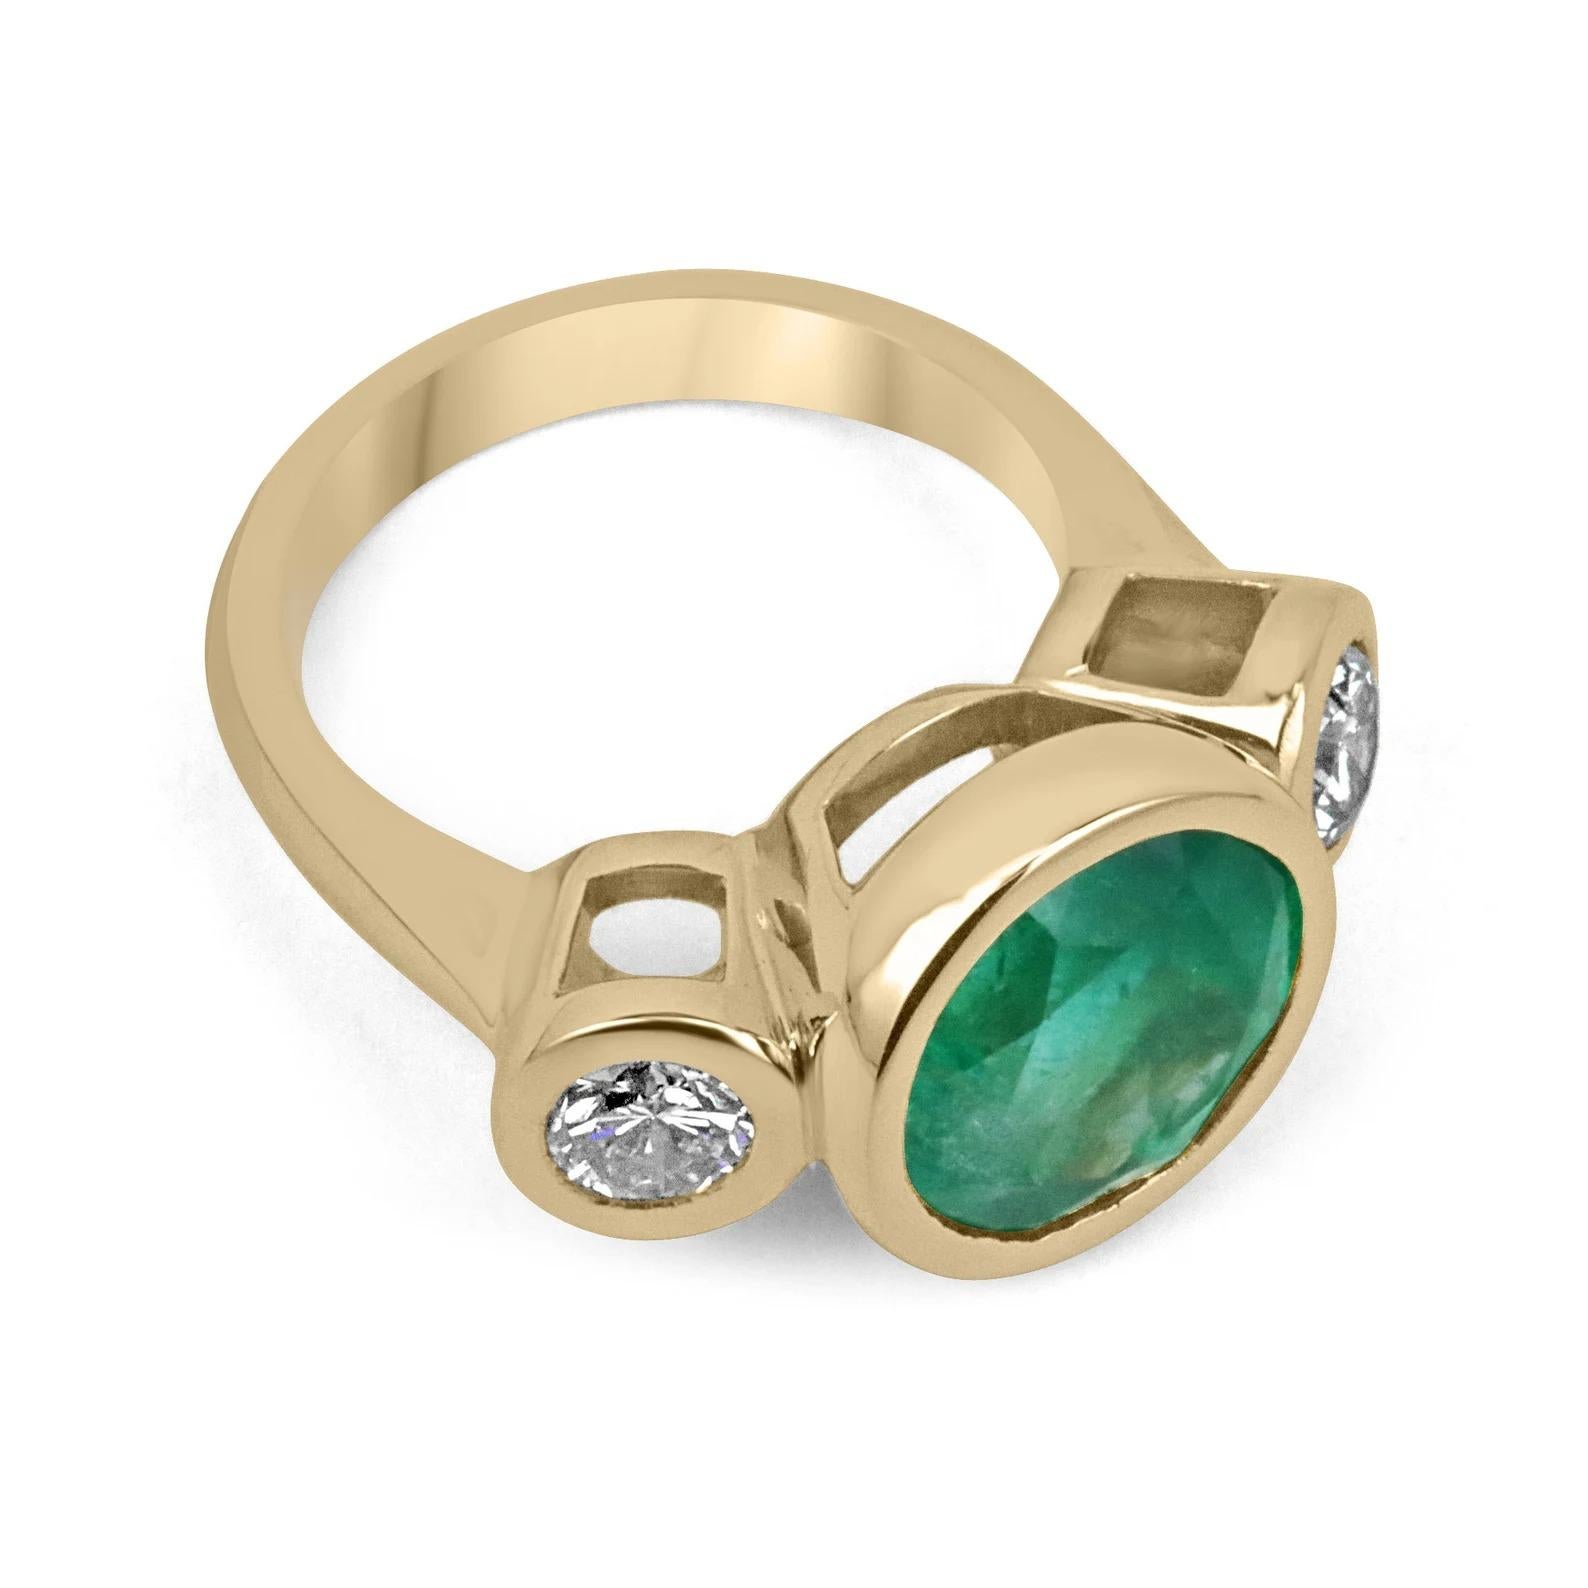 Displayed is an impressive AAA top-quality emerald & VS diamond three-stone ring in solid 18K yellow gold. This solitaire ring carries a rare, round VERY RARE Colombian emerald in a secure bezel setting. Fully faceted, this rare gemstone showcases